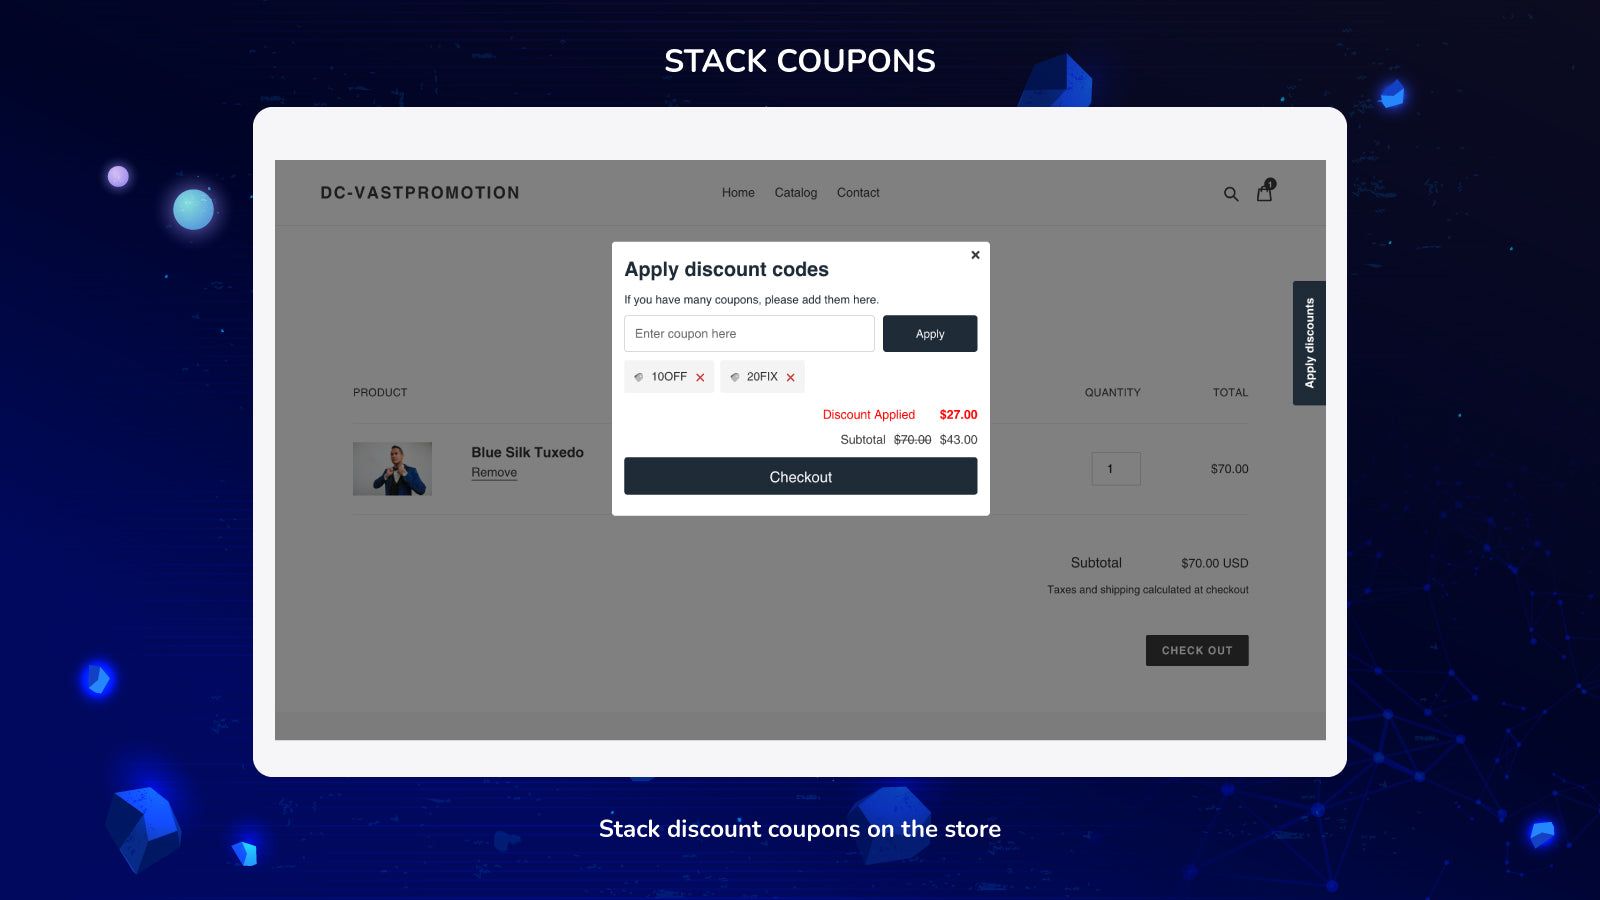 Stack coupons on the store